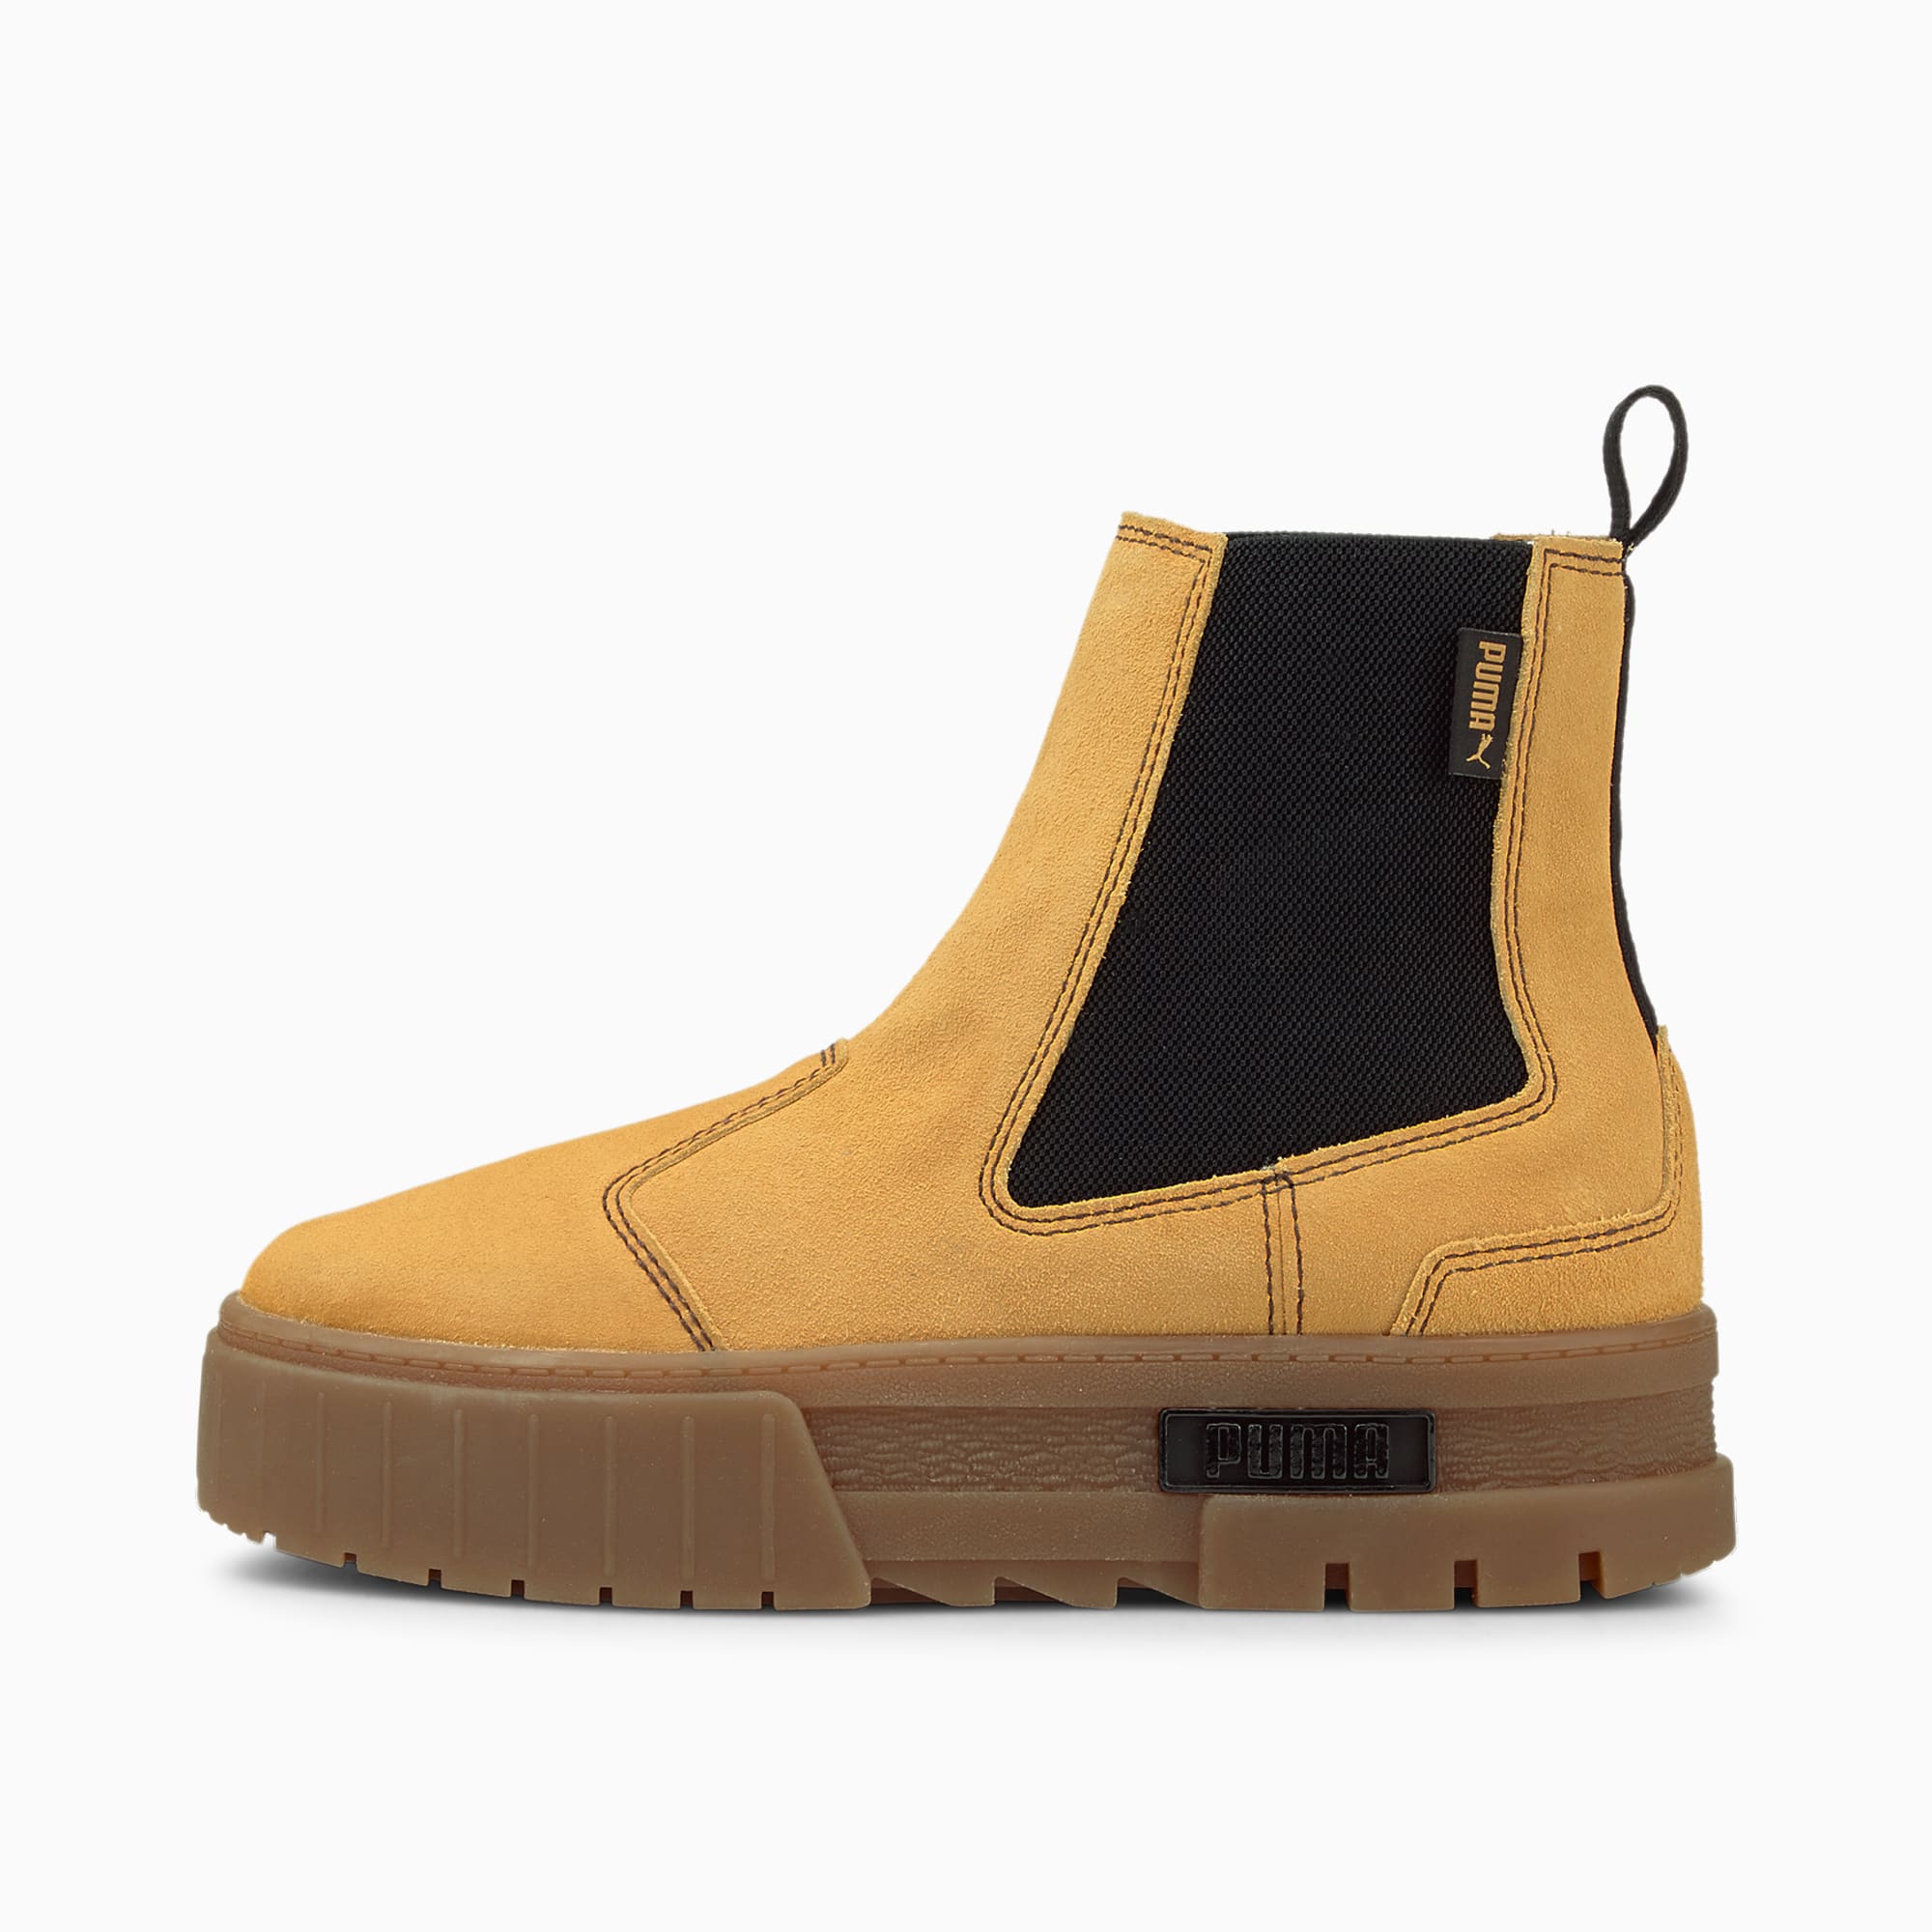 Puma Mayze Chelsea Boots In Black With Gum Sole | vlr.eng.br